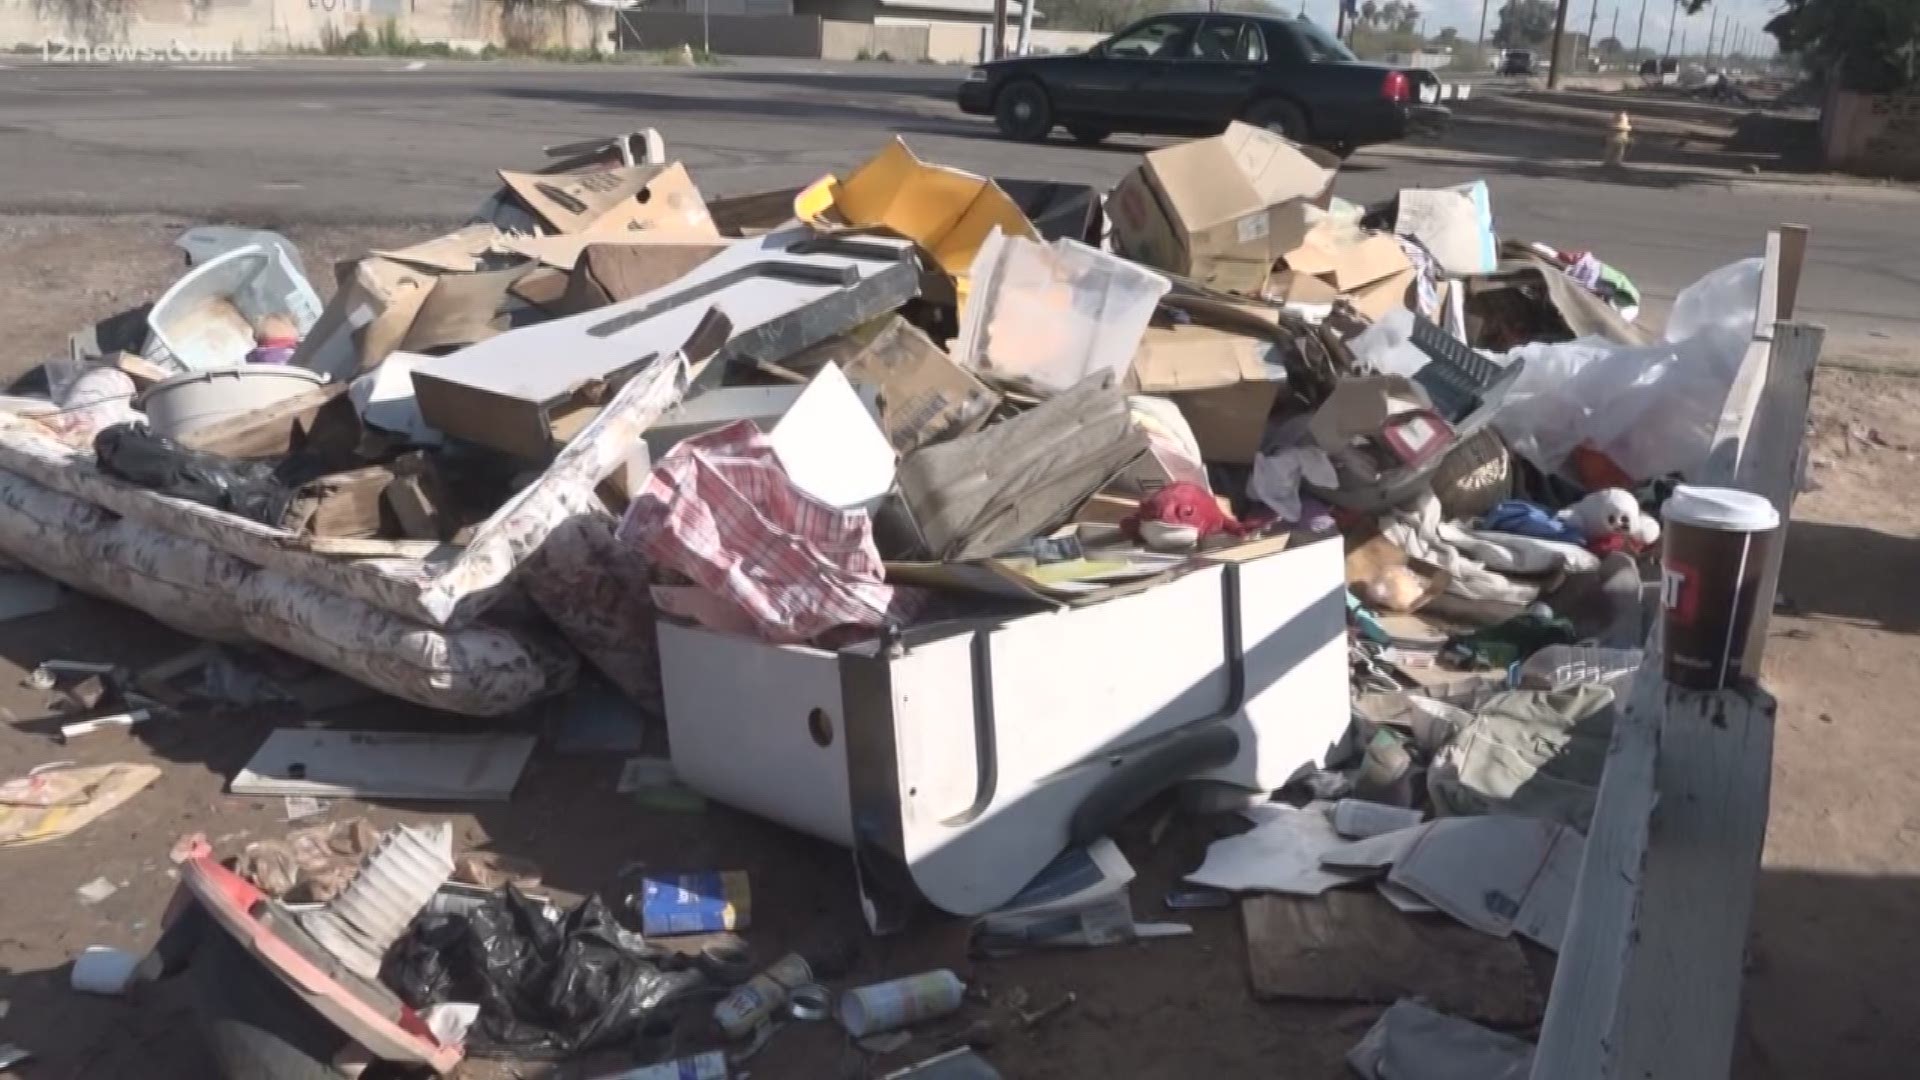 A Phoenix couple's front yard has turned into an illegal dumping ground. After 12 News spoke to city officials the trash pile has been removed.